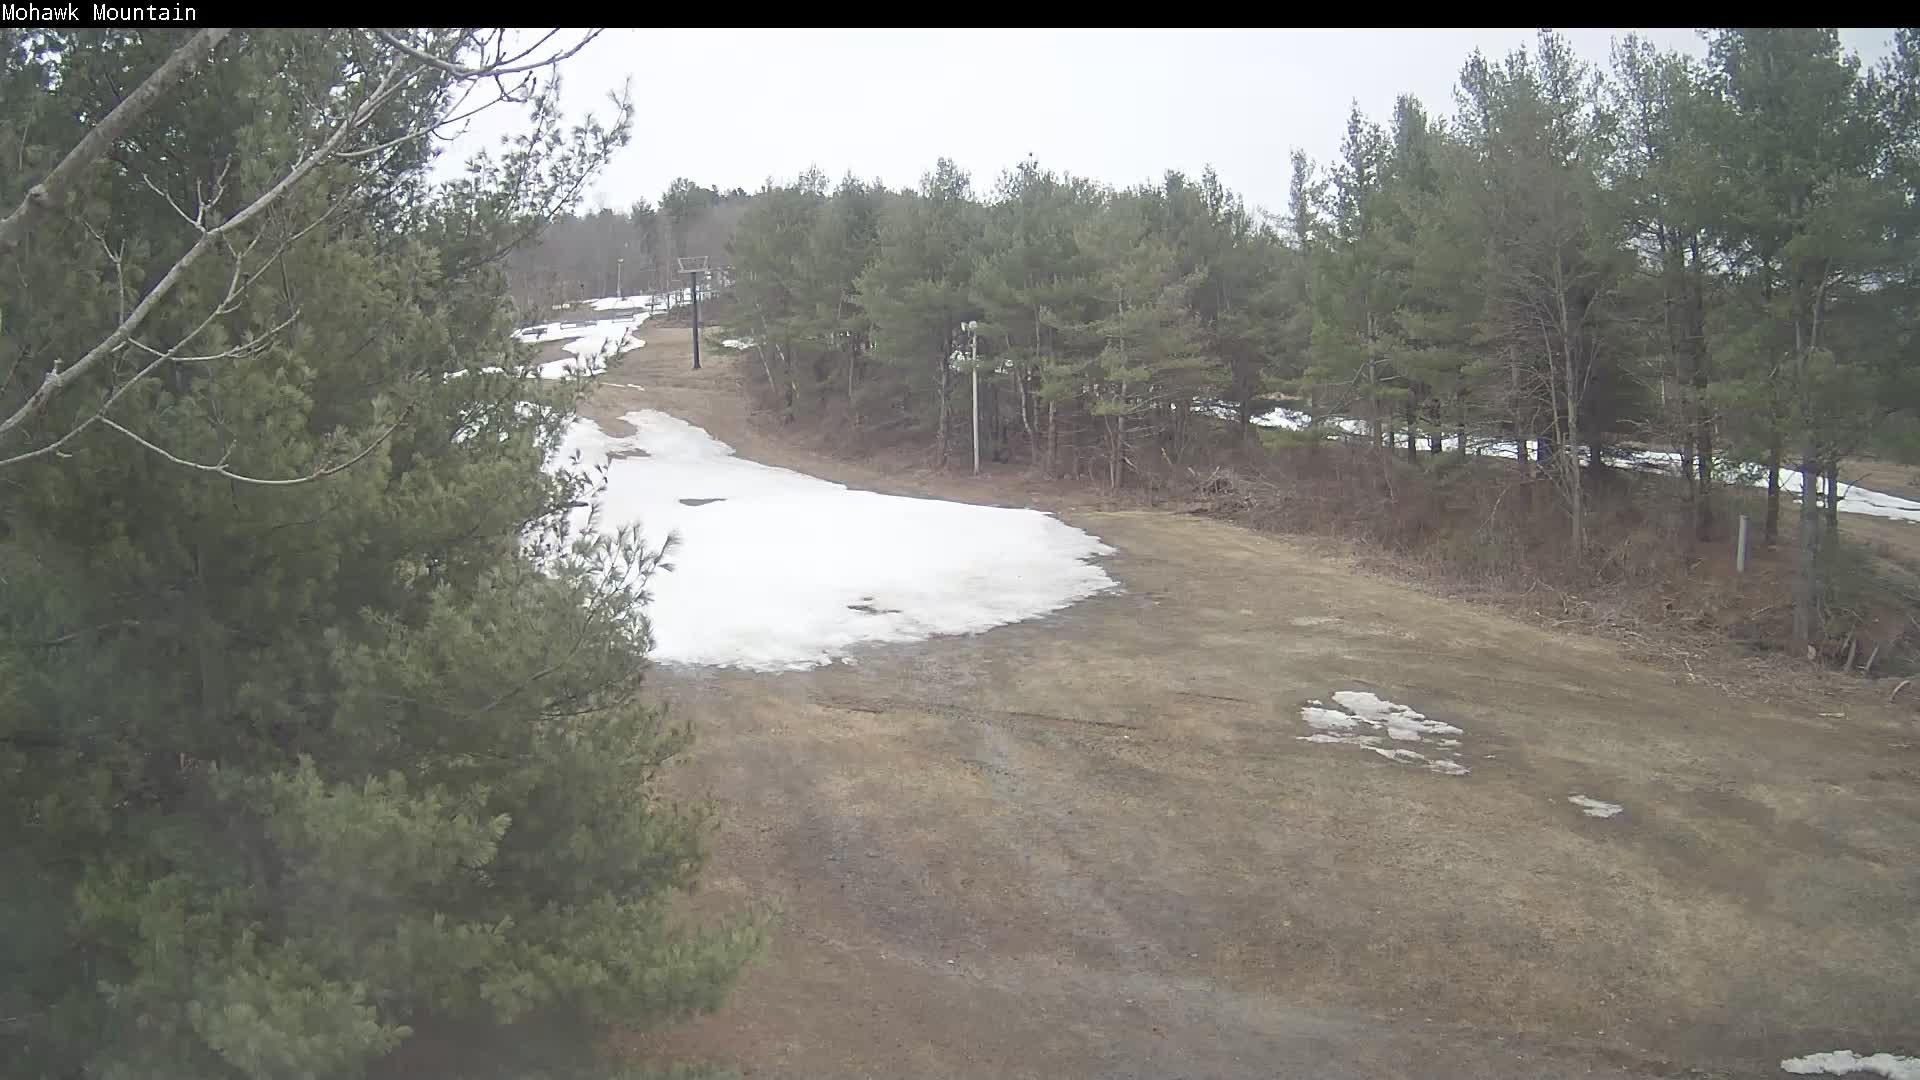 Traffic Cam Cornwall › South-East: Mohawk Mountain